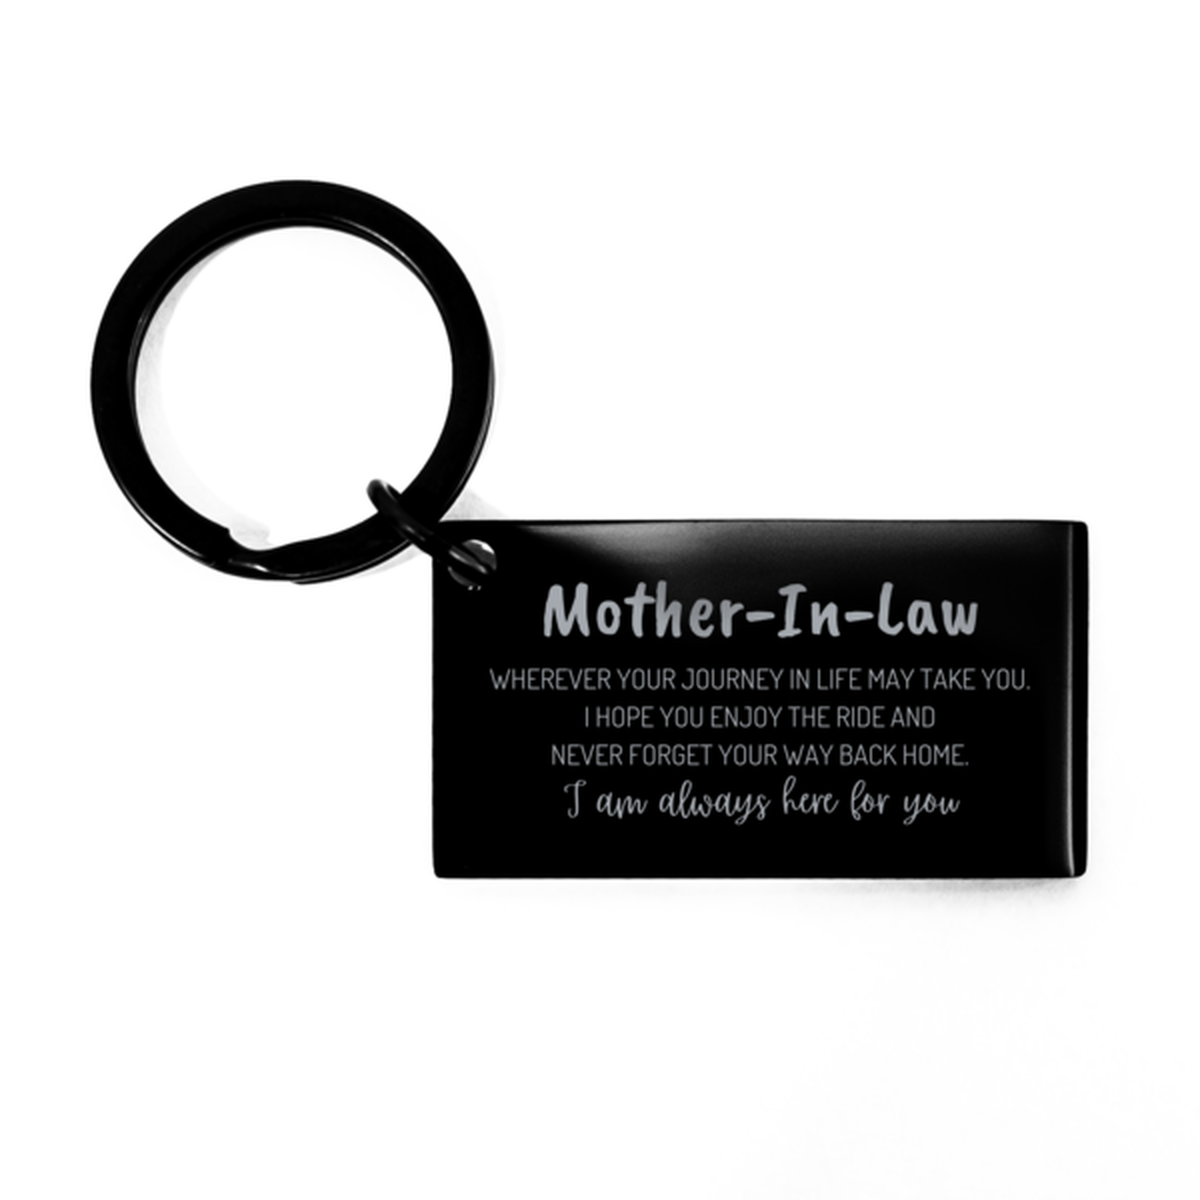 Mother-In-Law wherever your journey in life may take you, I am always here for you Mother-In-Law Keychain, Awesome Christmas Gifts For Mother-In-Law, Mother-In-Law Birthday Gifts for Men Women Family Loved One